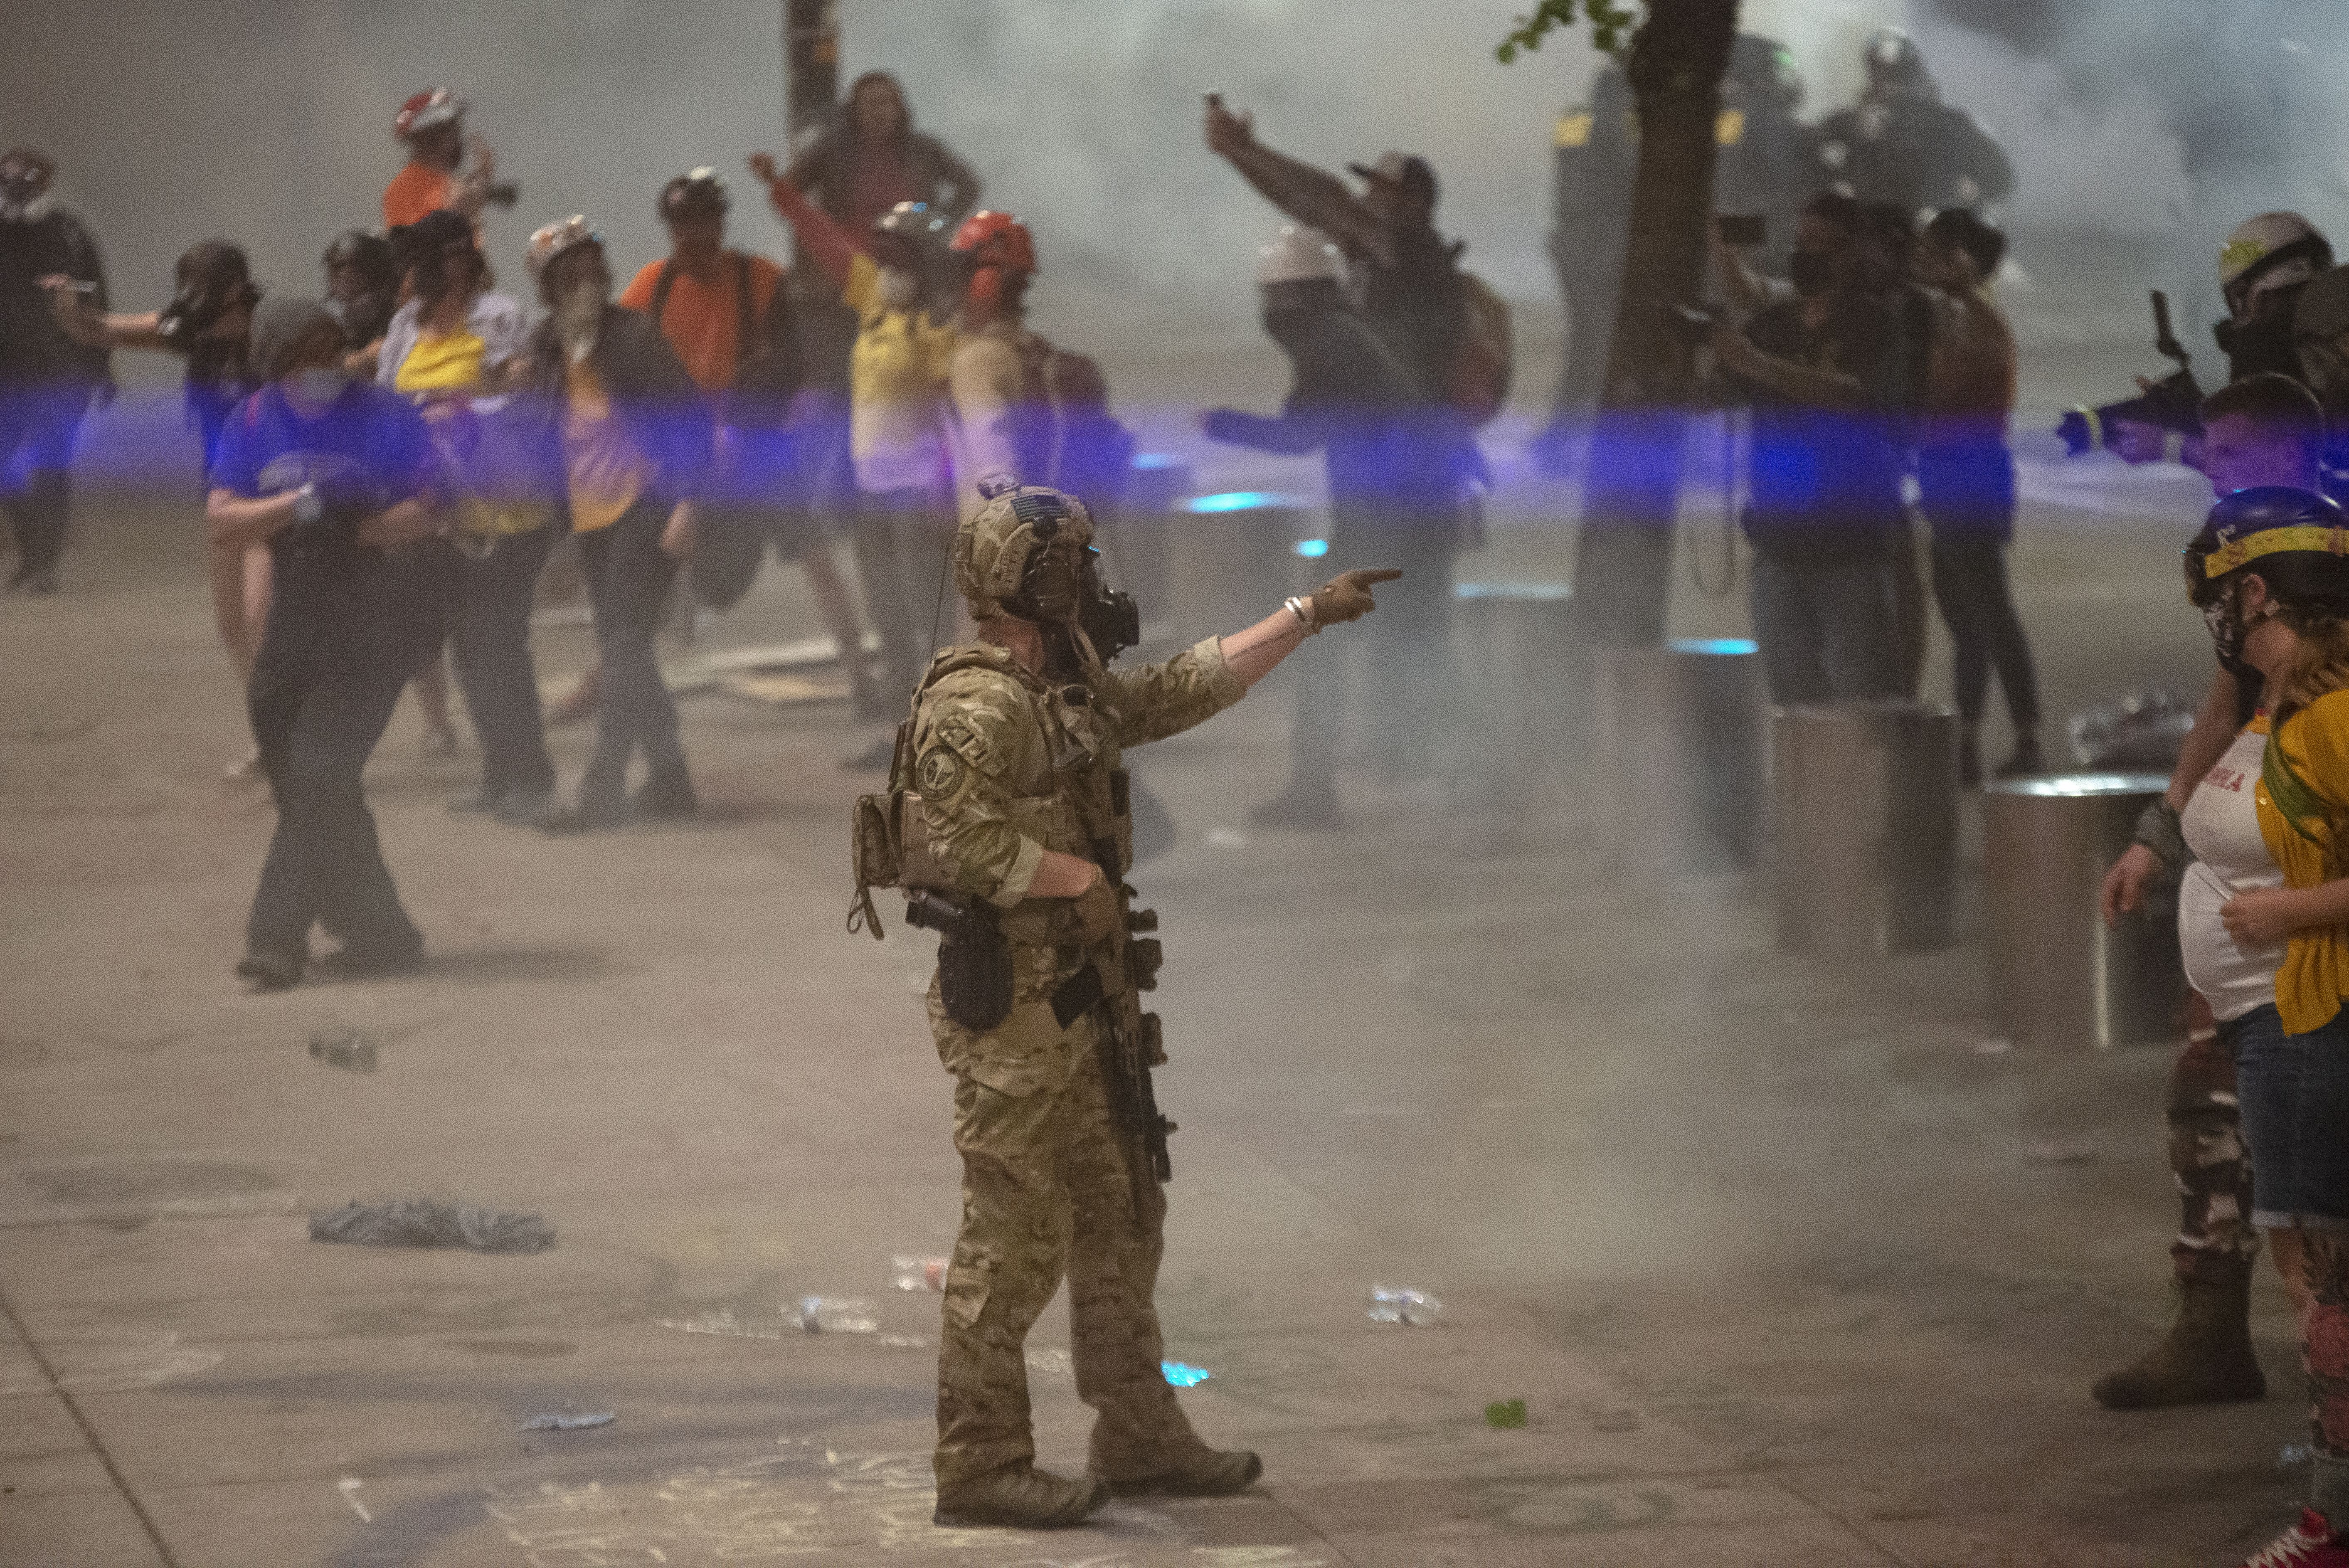 A federal officer points at a protester with tear gas in the background